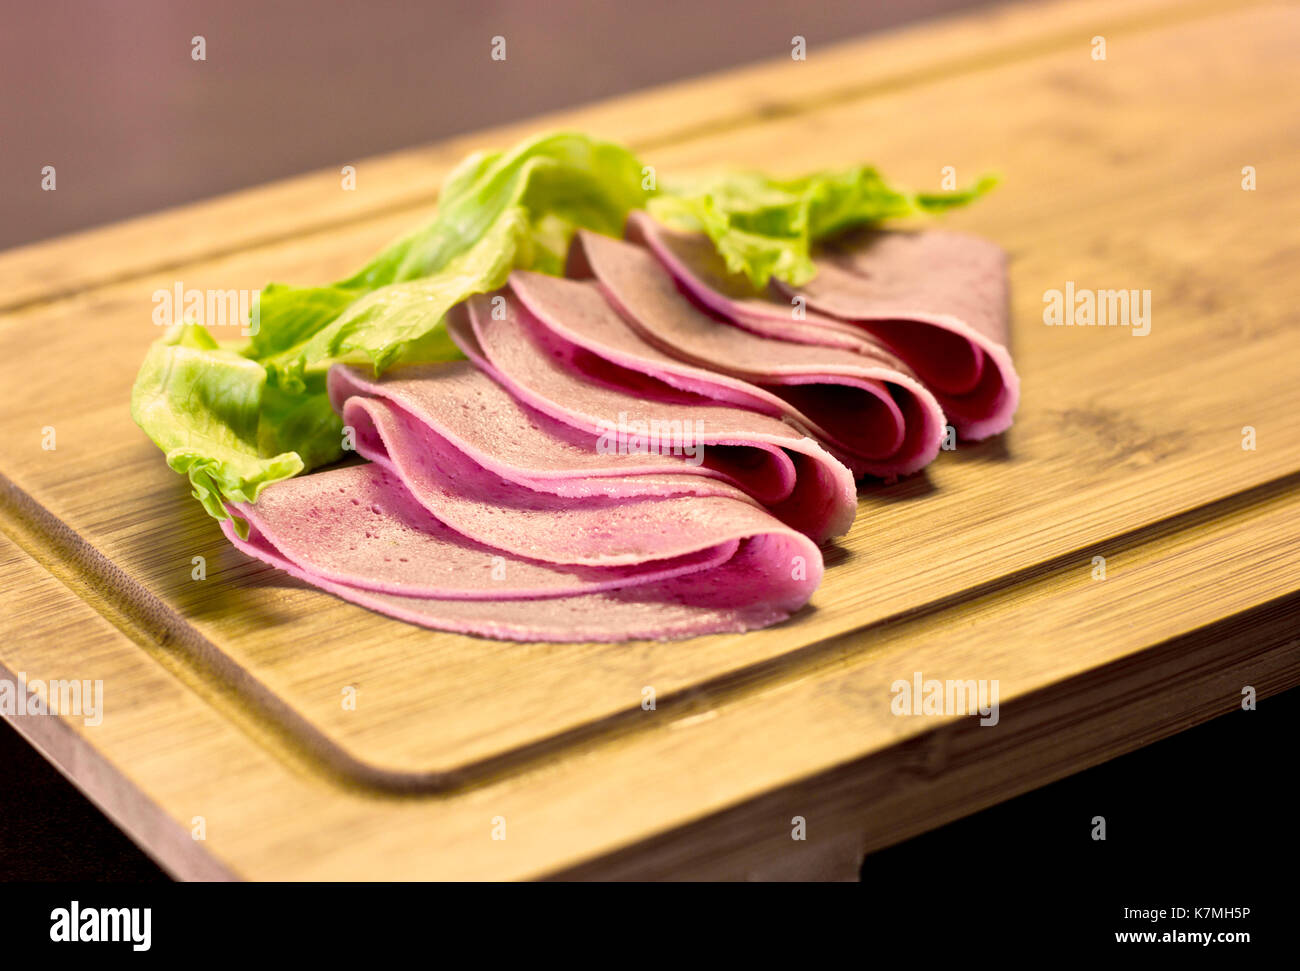 Thinly sliced sausage with green salad on wooden board Stock Photo